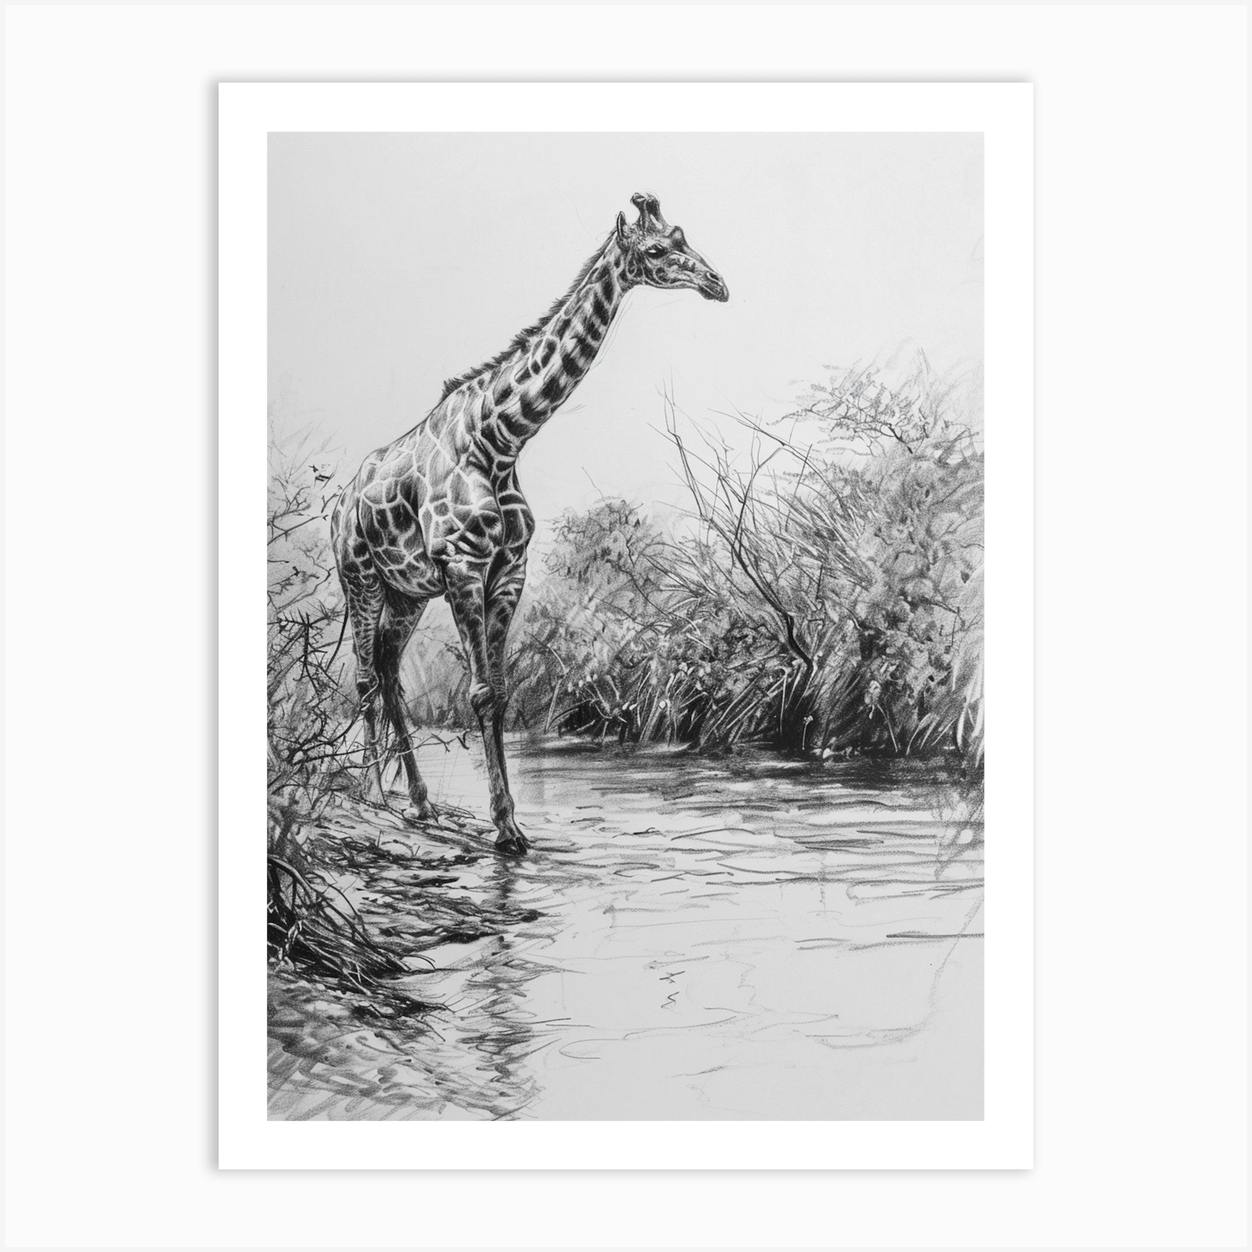 Giraffe Pencil Sketch Stock Photos and Pictures - 1,266 Images |  Shutterstock